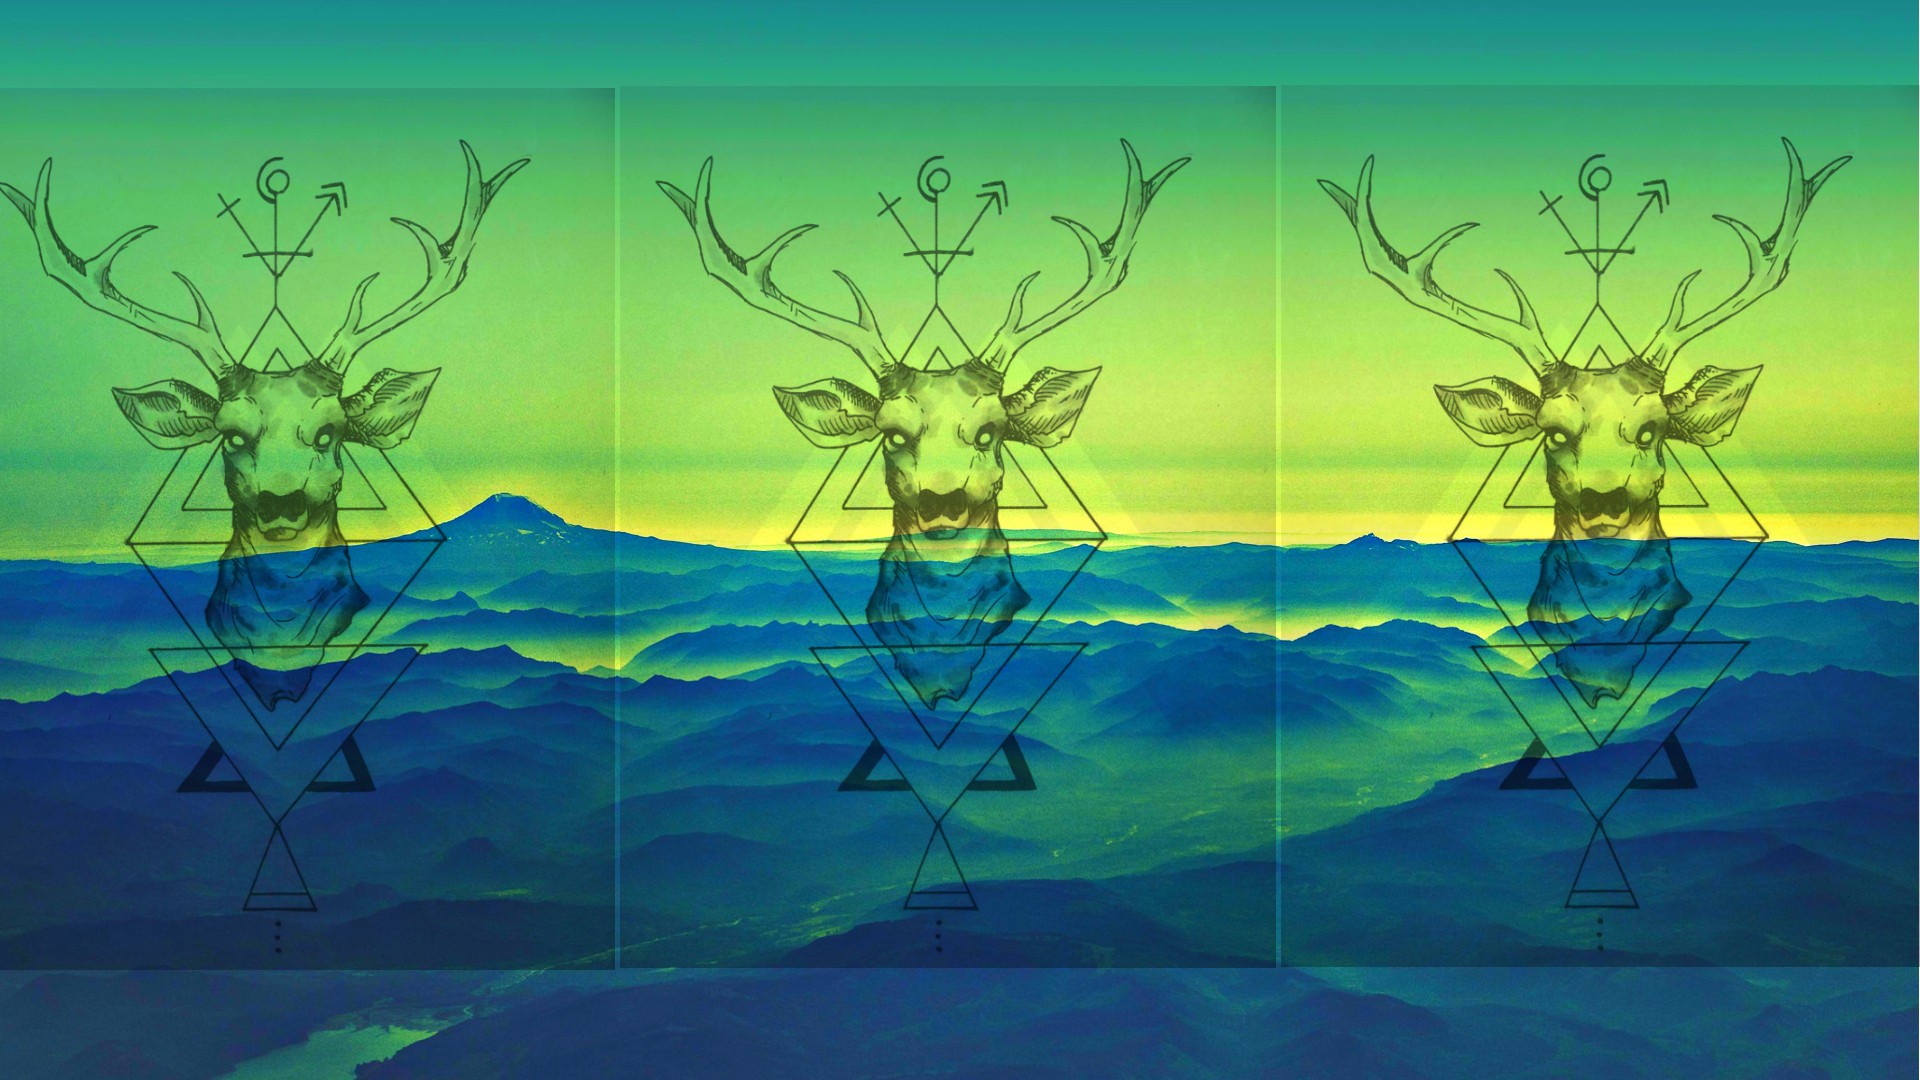 General 1920x1080 nature animals digital art deer triangle minimalism collage landscape mountains mist drawing antlers abstract